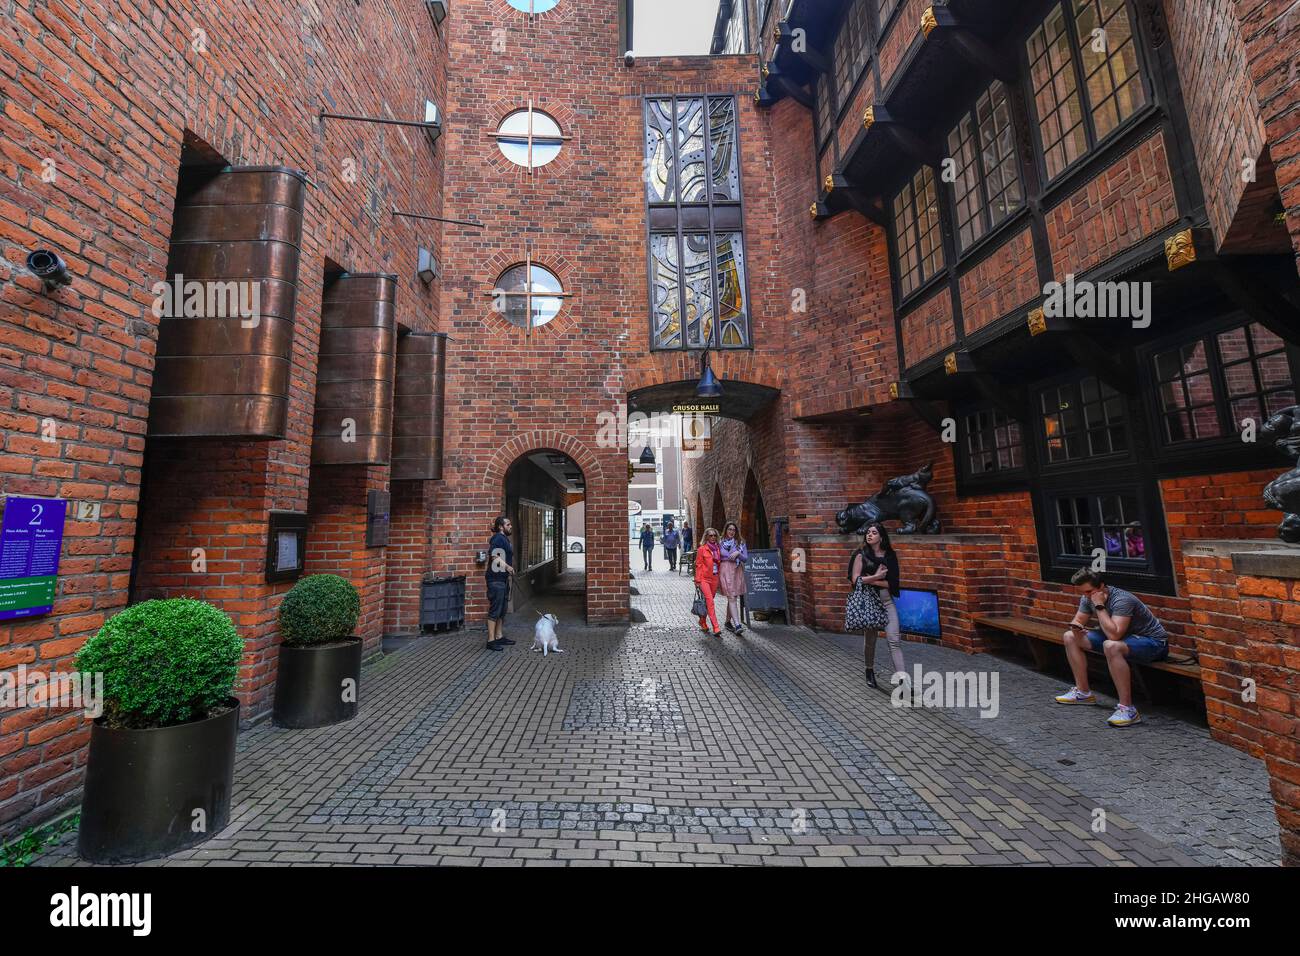 Atlantis House and Robinson Crusoe House (from left), Boettcherstrasse, Old Town, Bremen, Germany Stock Photo